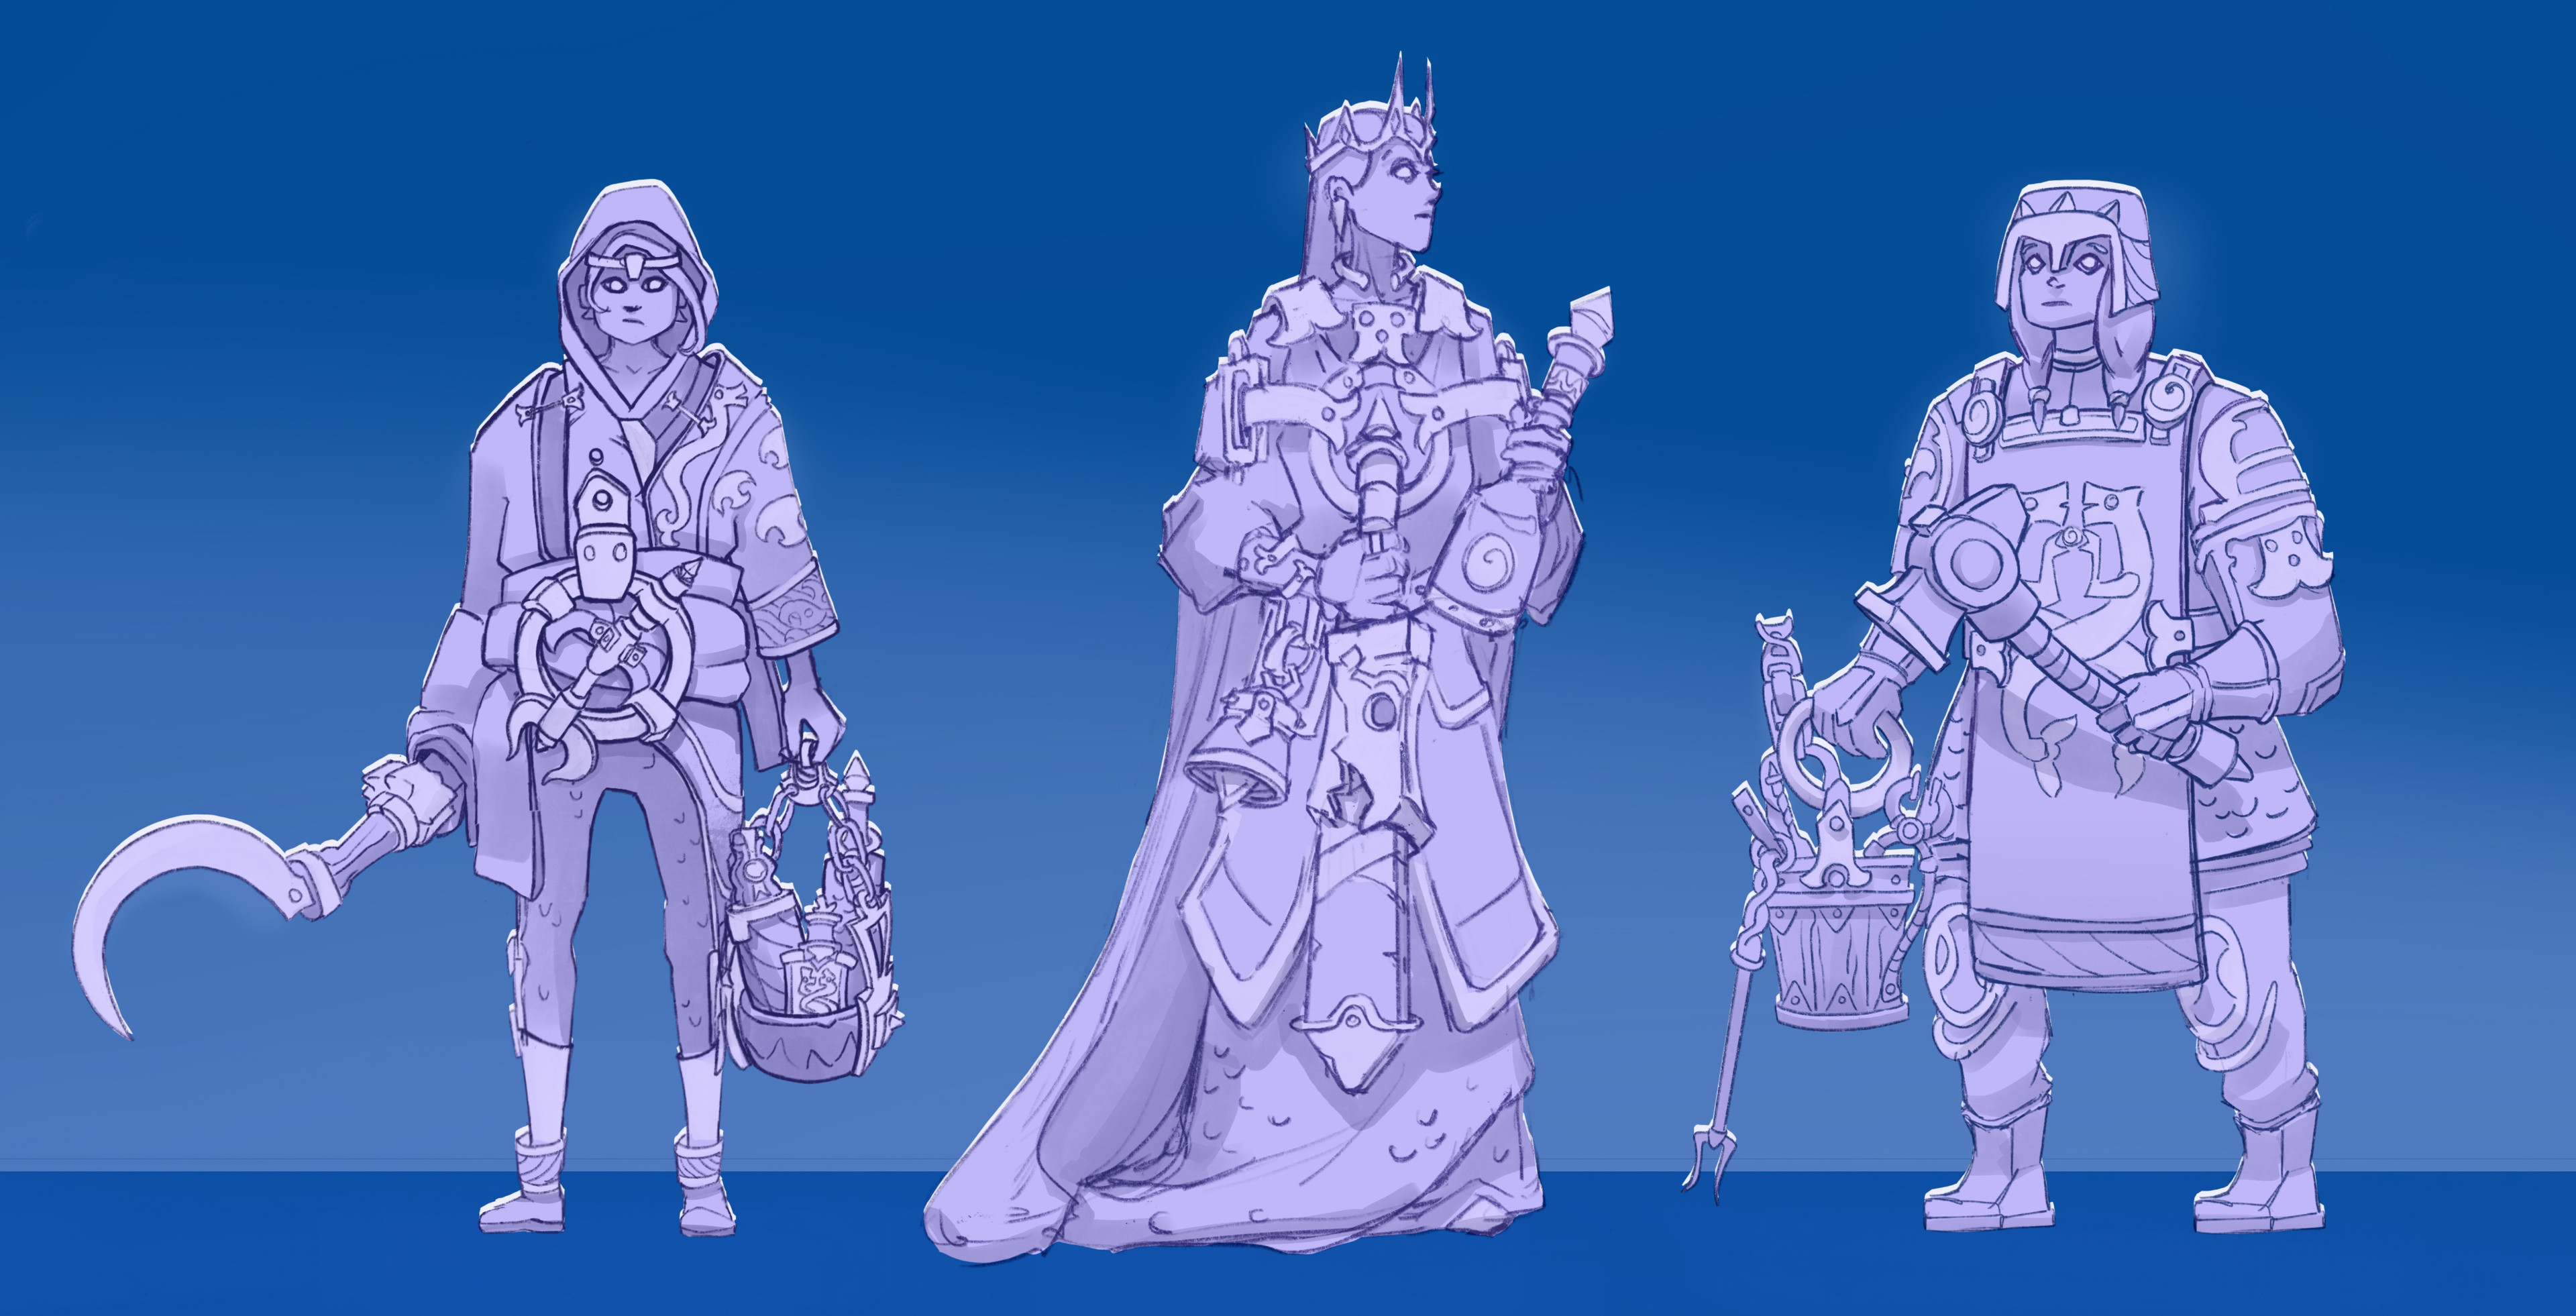 The Potion seller, the Queen and the Smith.